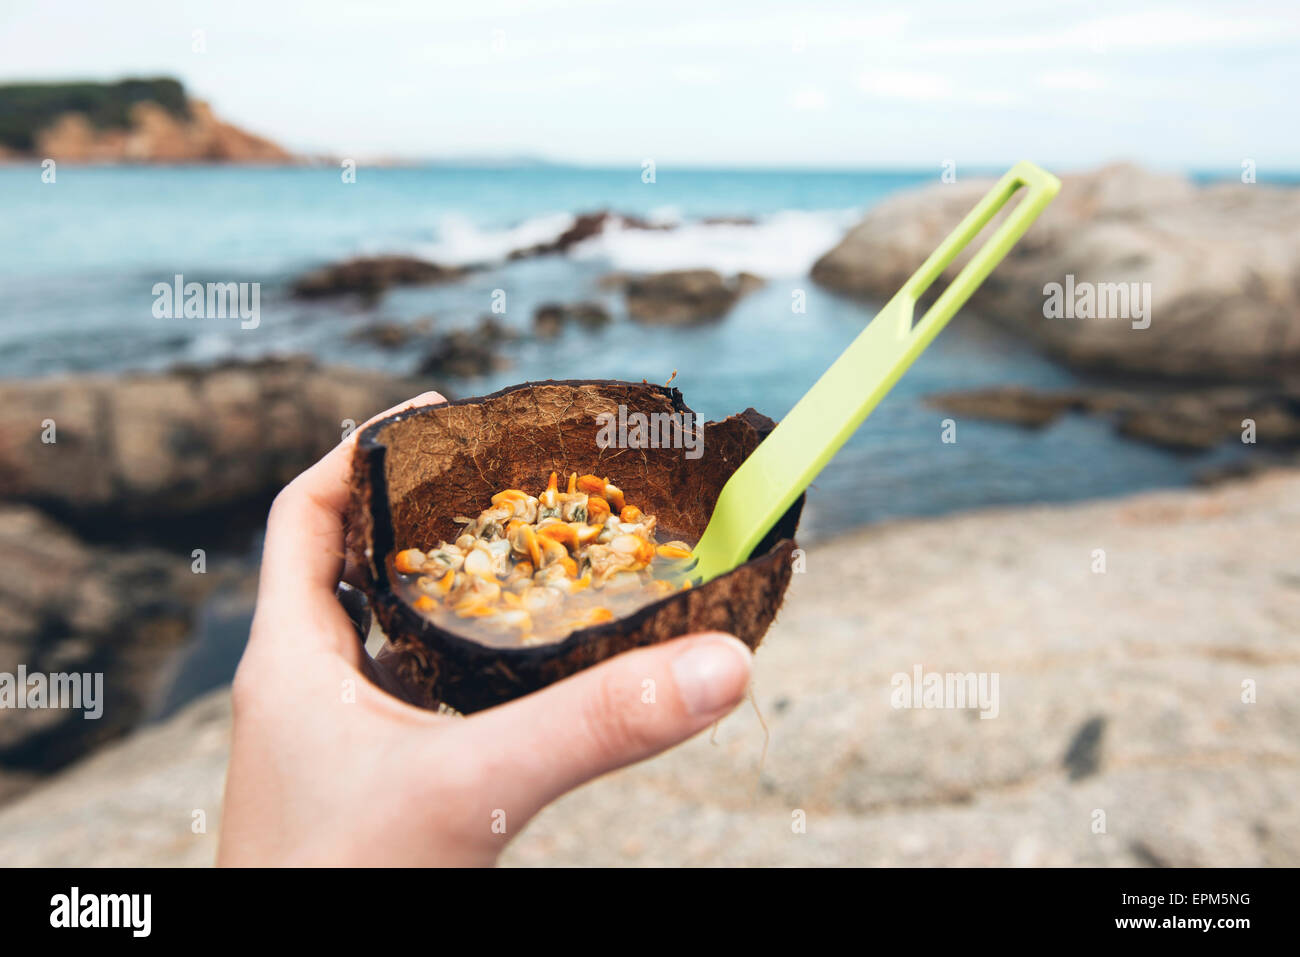 Spain, Costa Brava, woman's hand holding coconut shell with cockles Stock Photo